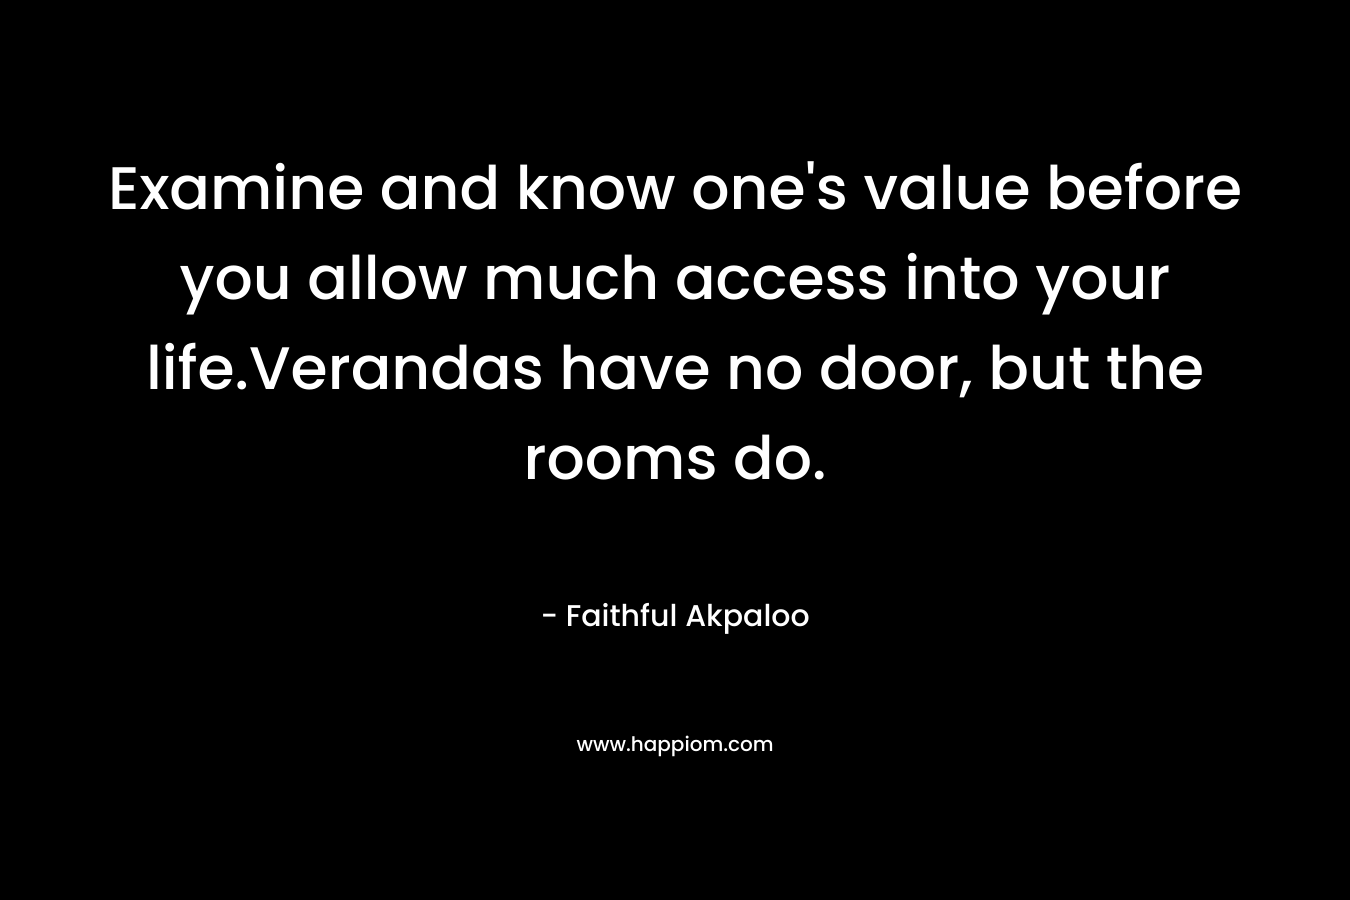 Examine and know one's value before you allow much access into your life.Verandas have no door, but the rooms do.